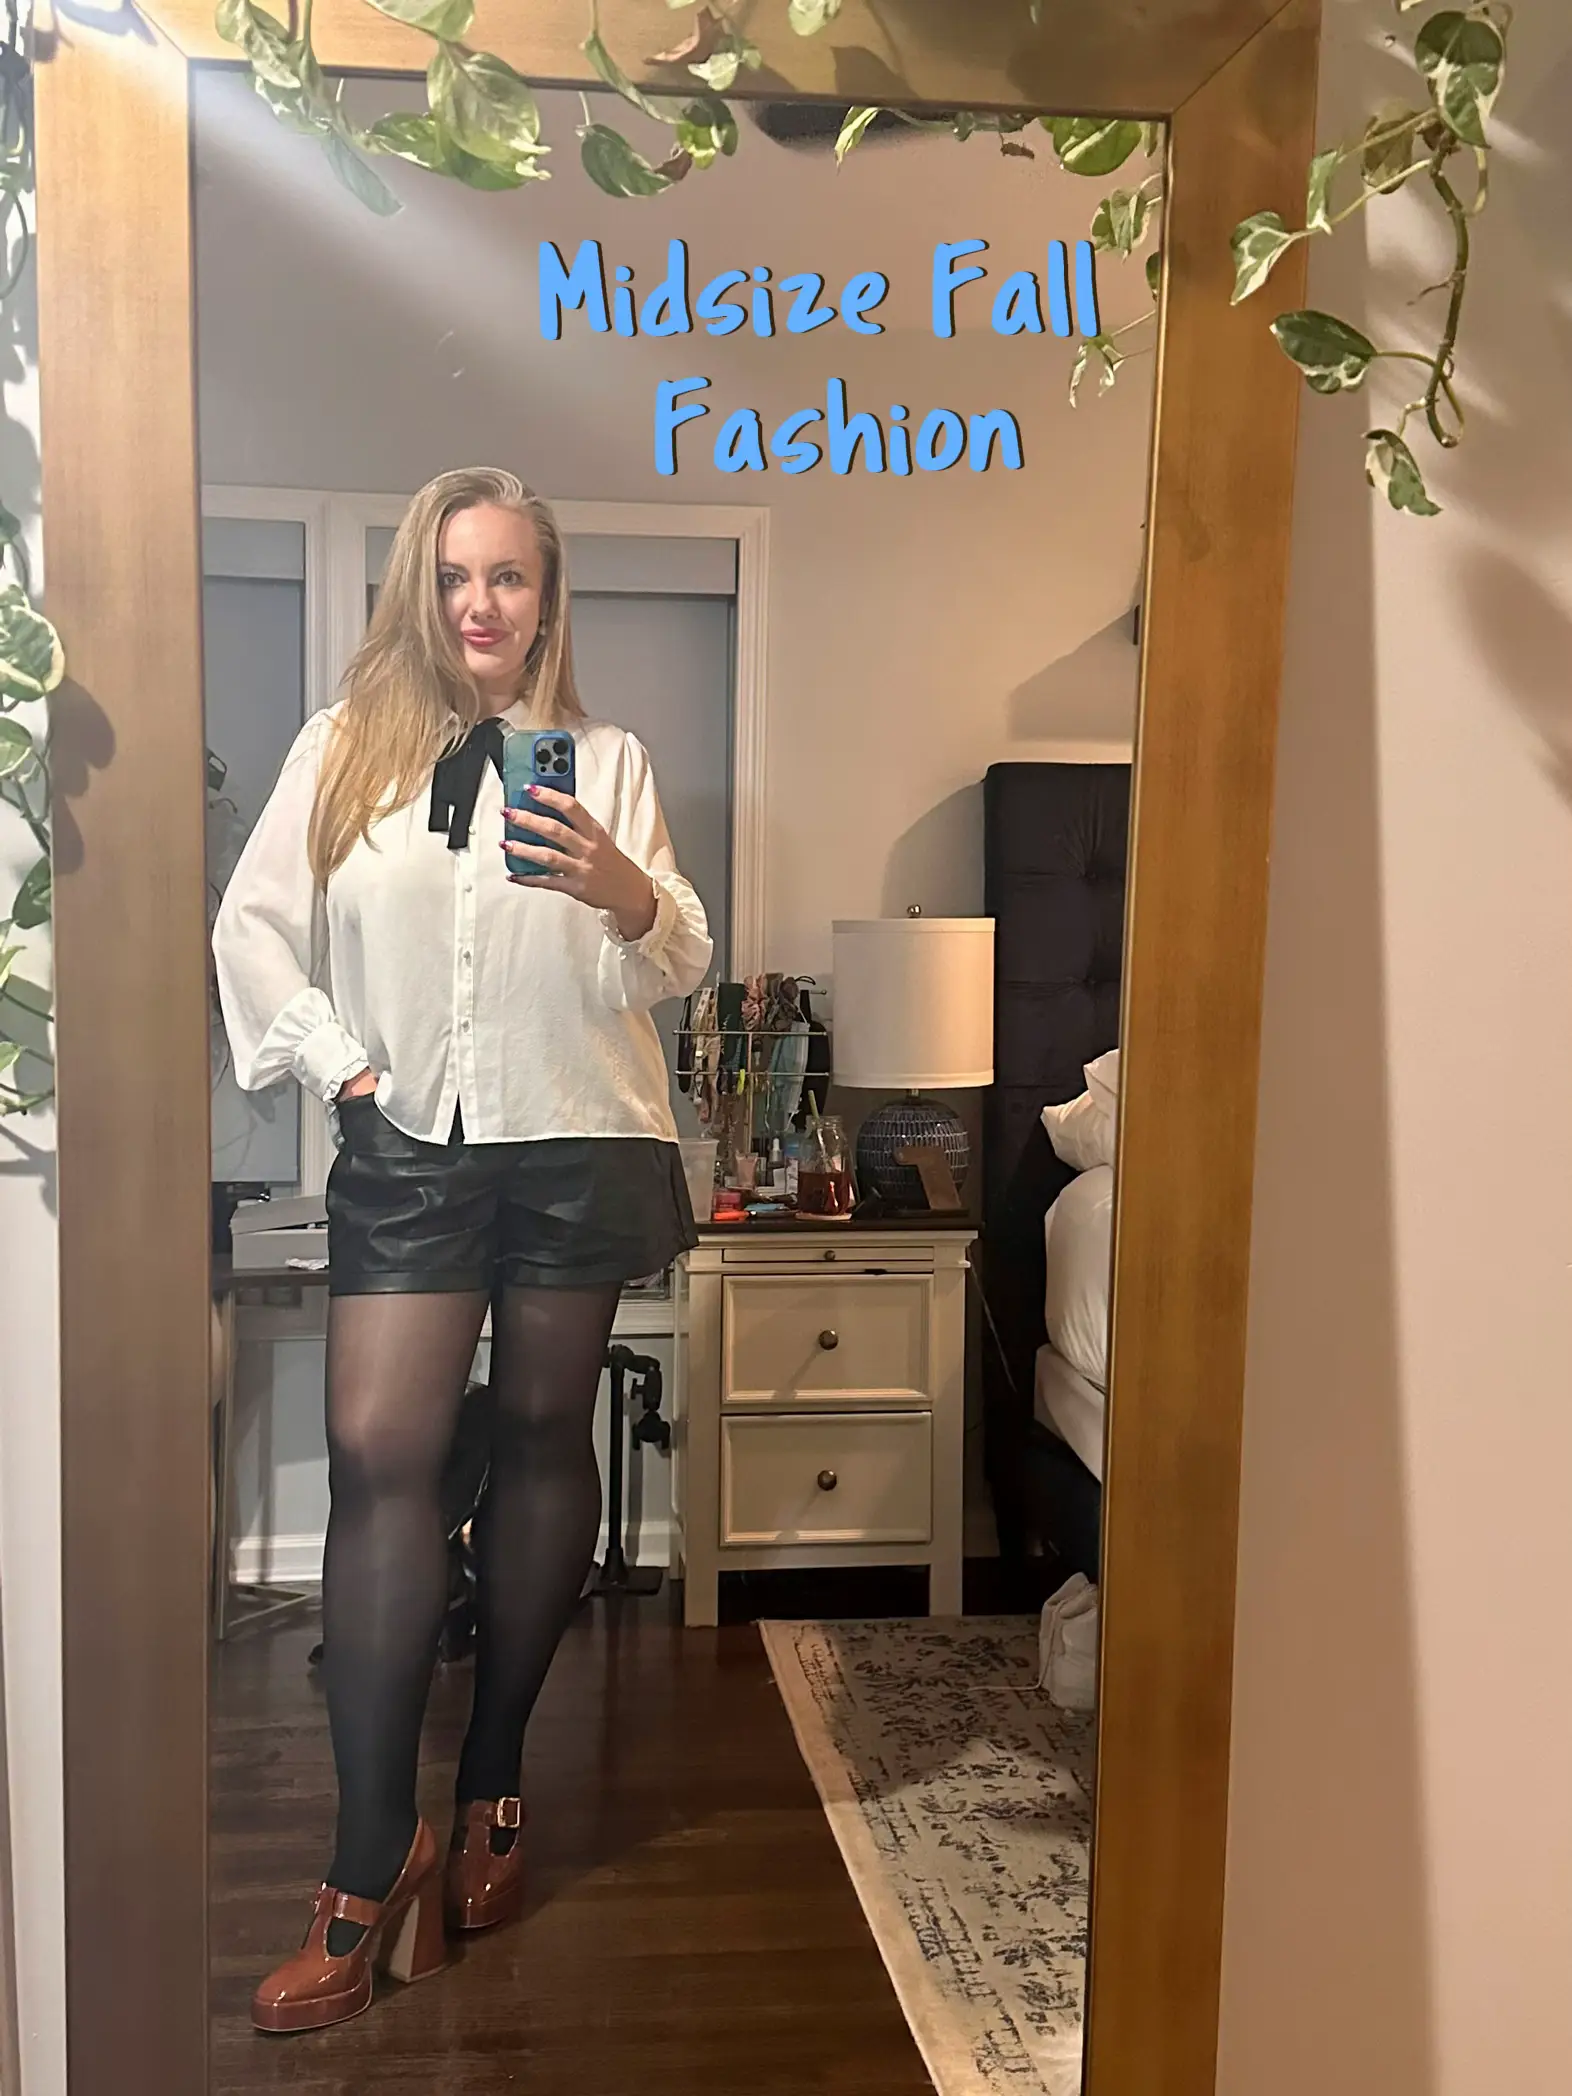 midsize fall outfits🍂  Cute fall outfits, Midsize outfits, Curvy